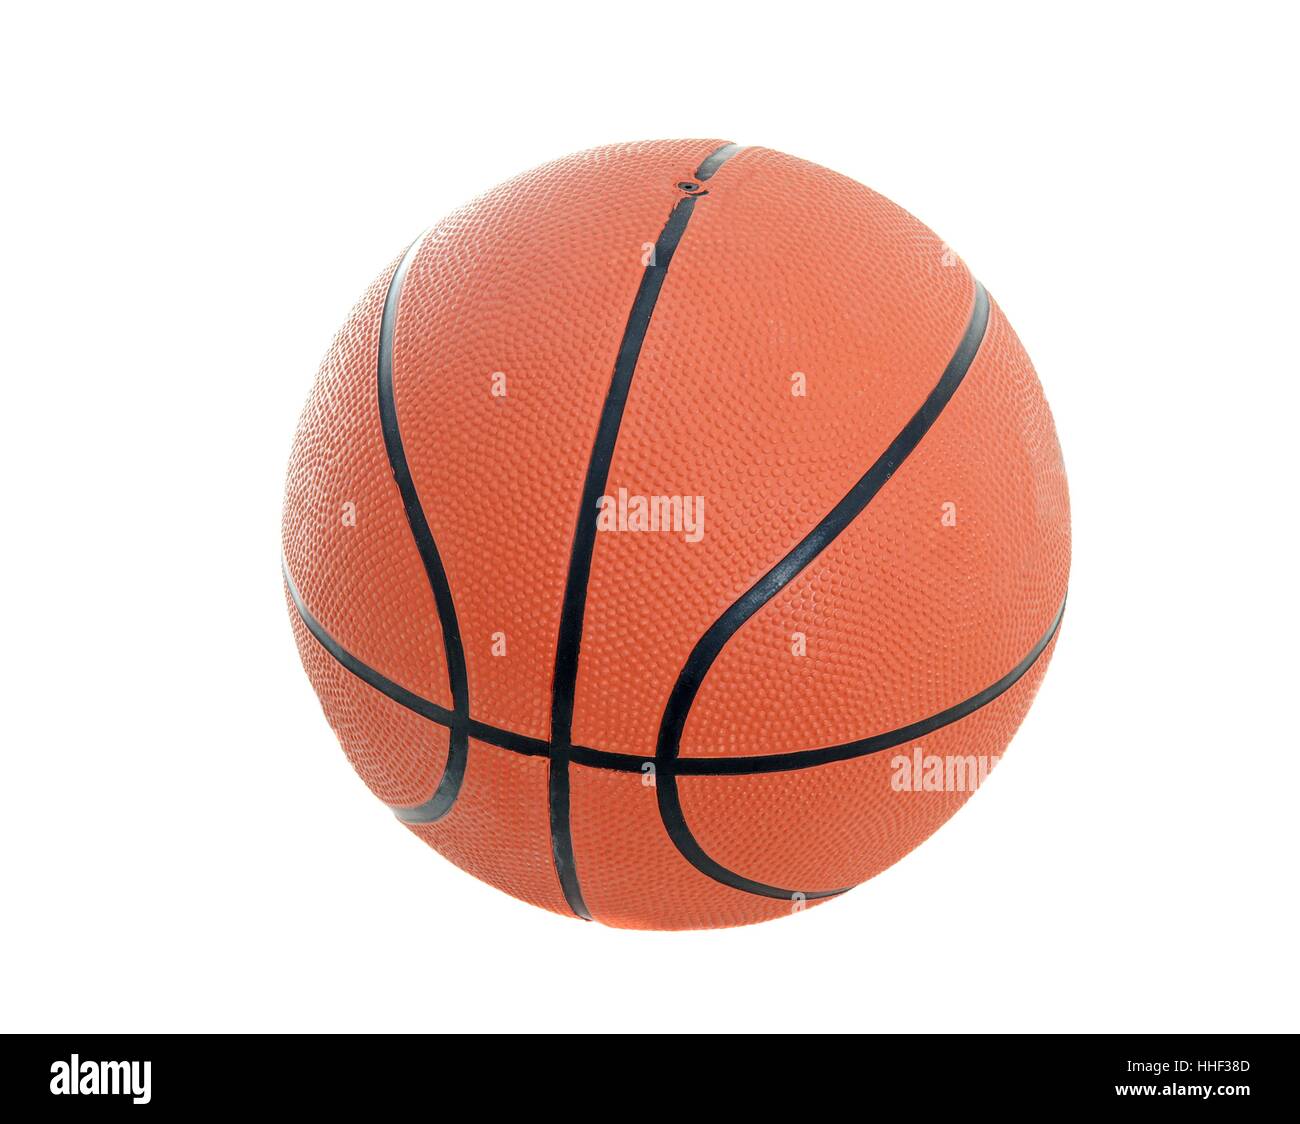 sport, sports, ball, basket, toy, basketball, equipment, piece, section, Stock Photo